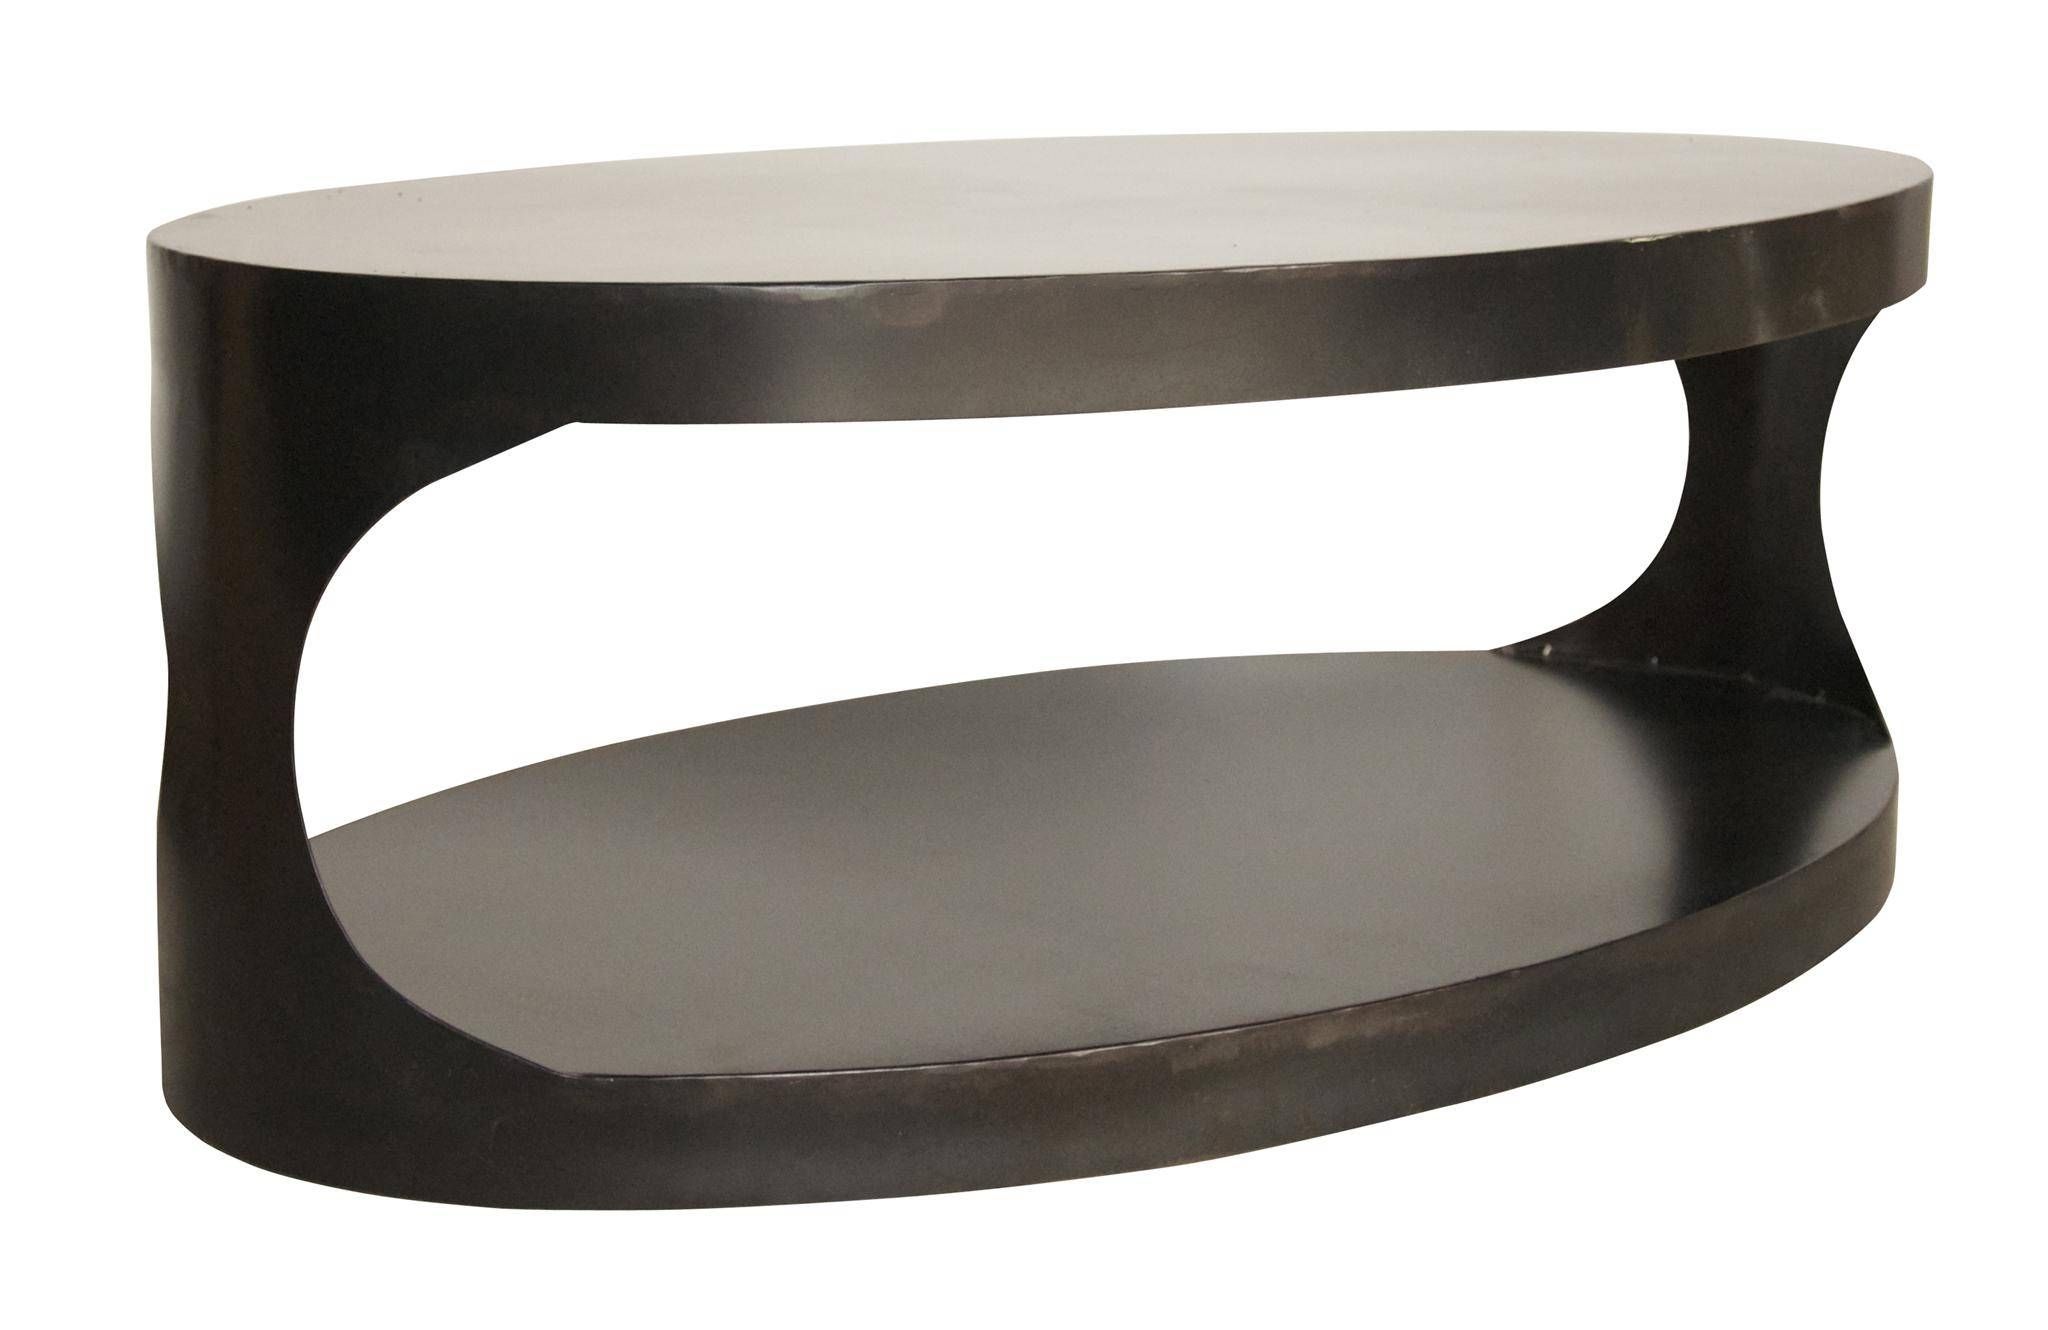 Furniture: Small Oval Coffee Table | Cheap Coffee Table Sets Regarding Cheap Coffee Tables (View 4 of 30)